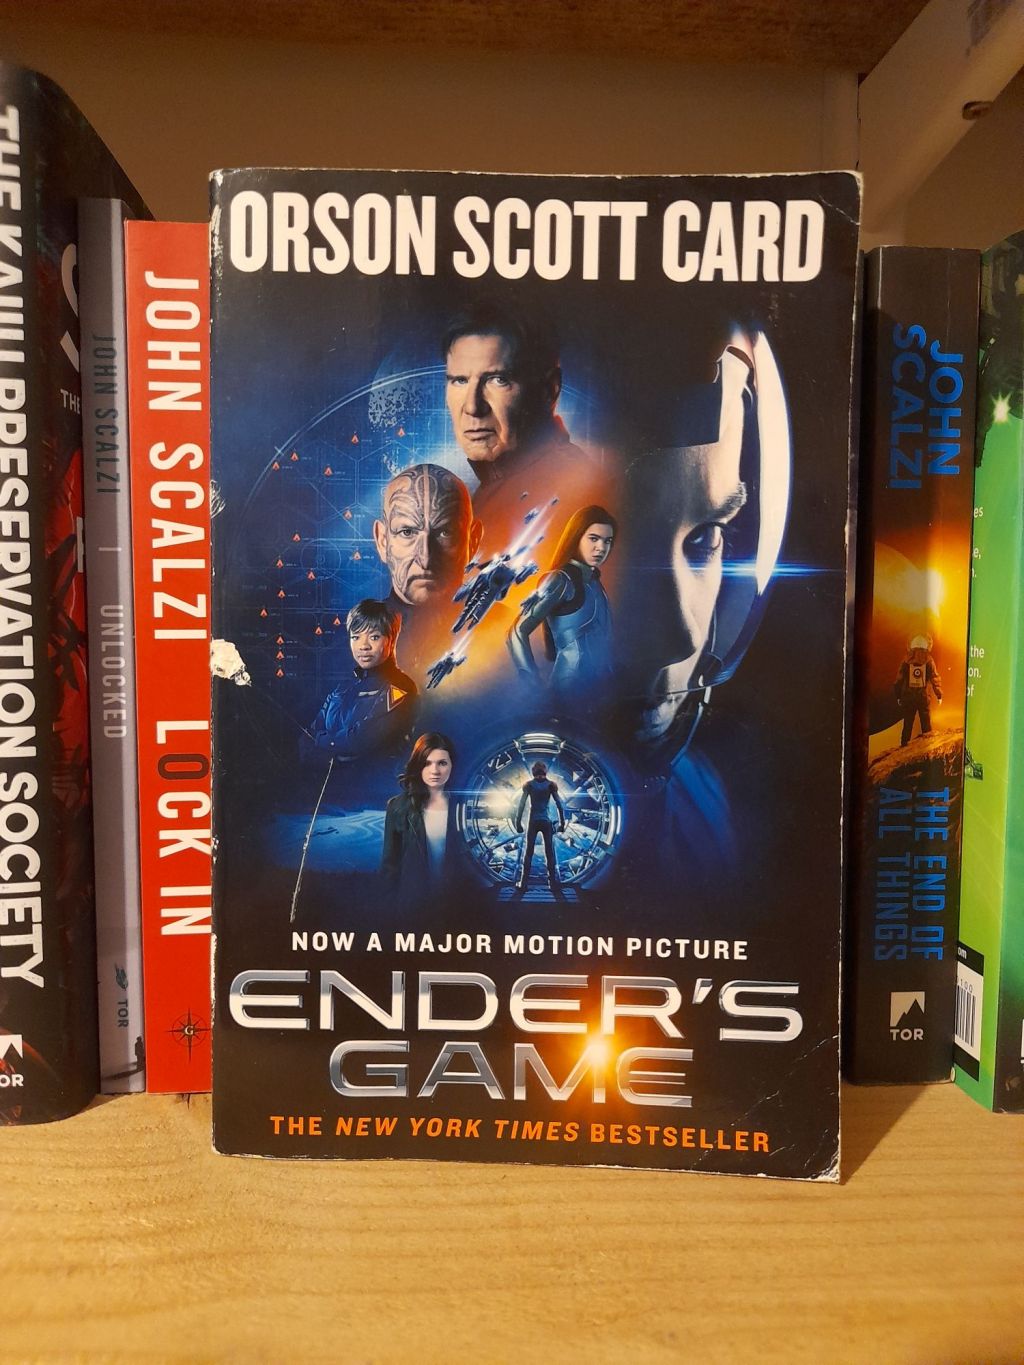 BOOK REVIEW: Ender’s Game, by Orson Scott Card